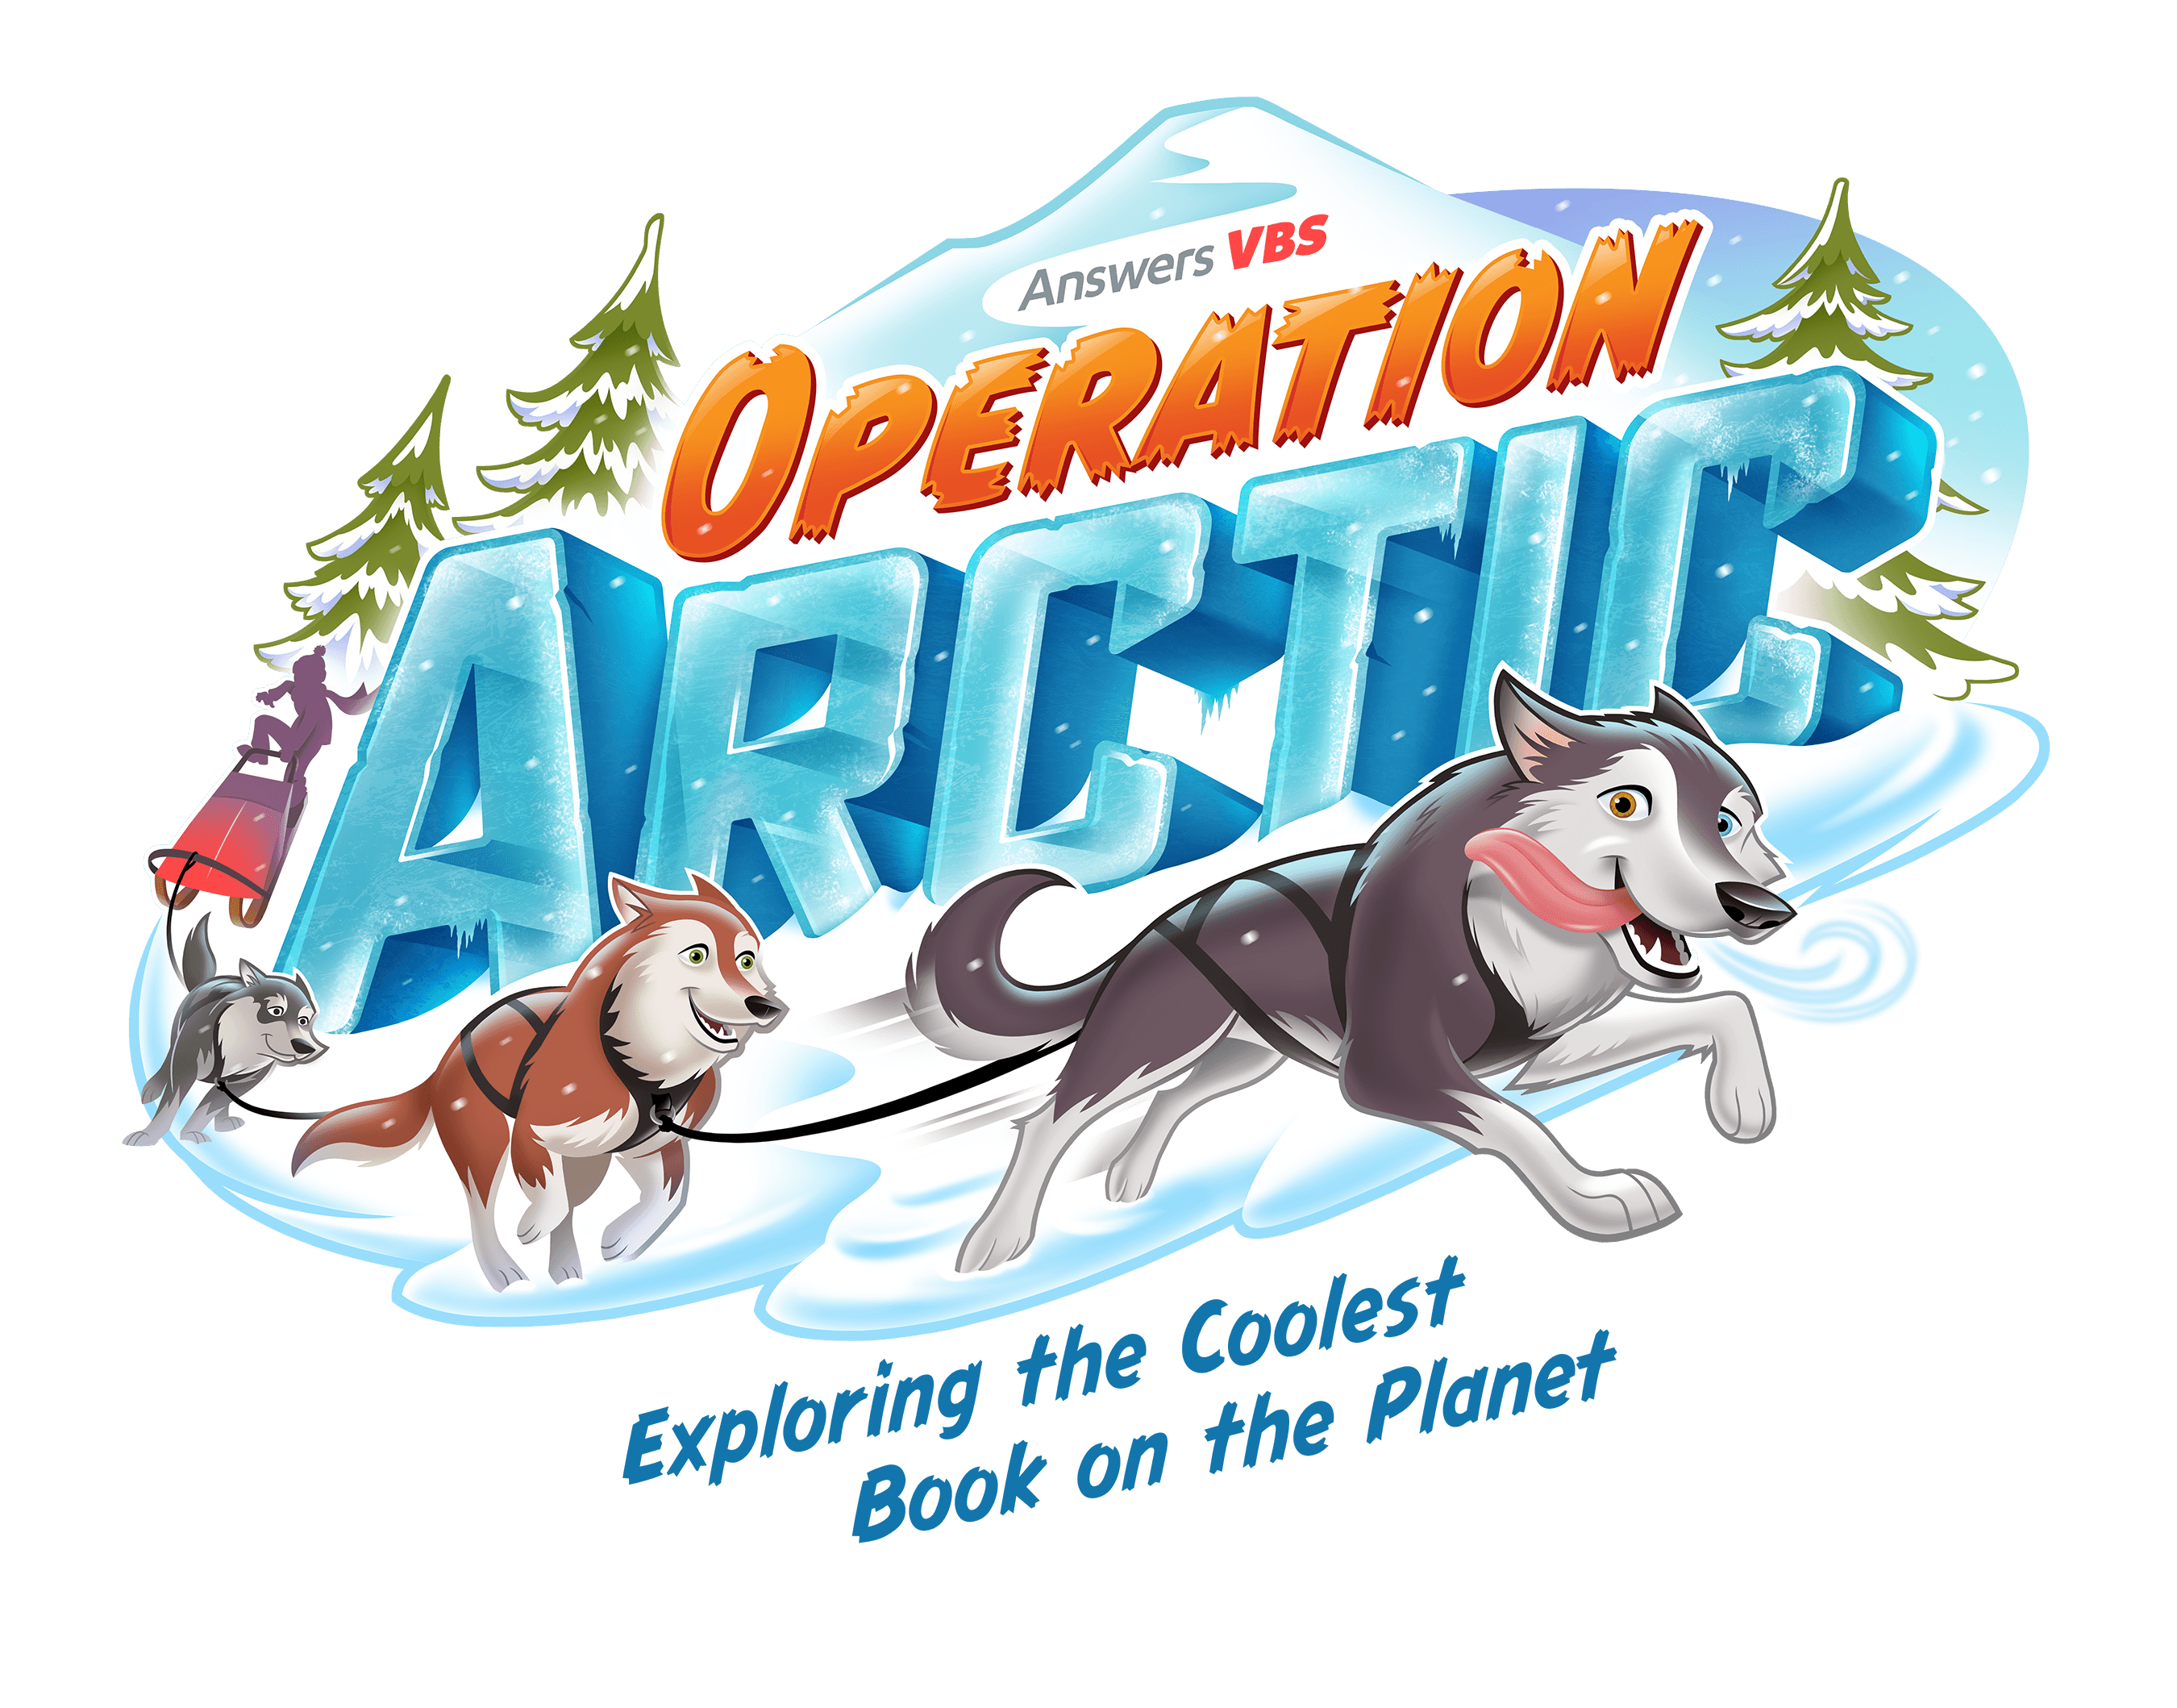 VBS Logo - Operation Arctic Resources. Answers VBS 2017